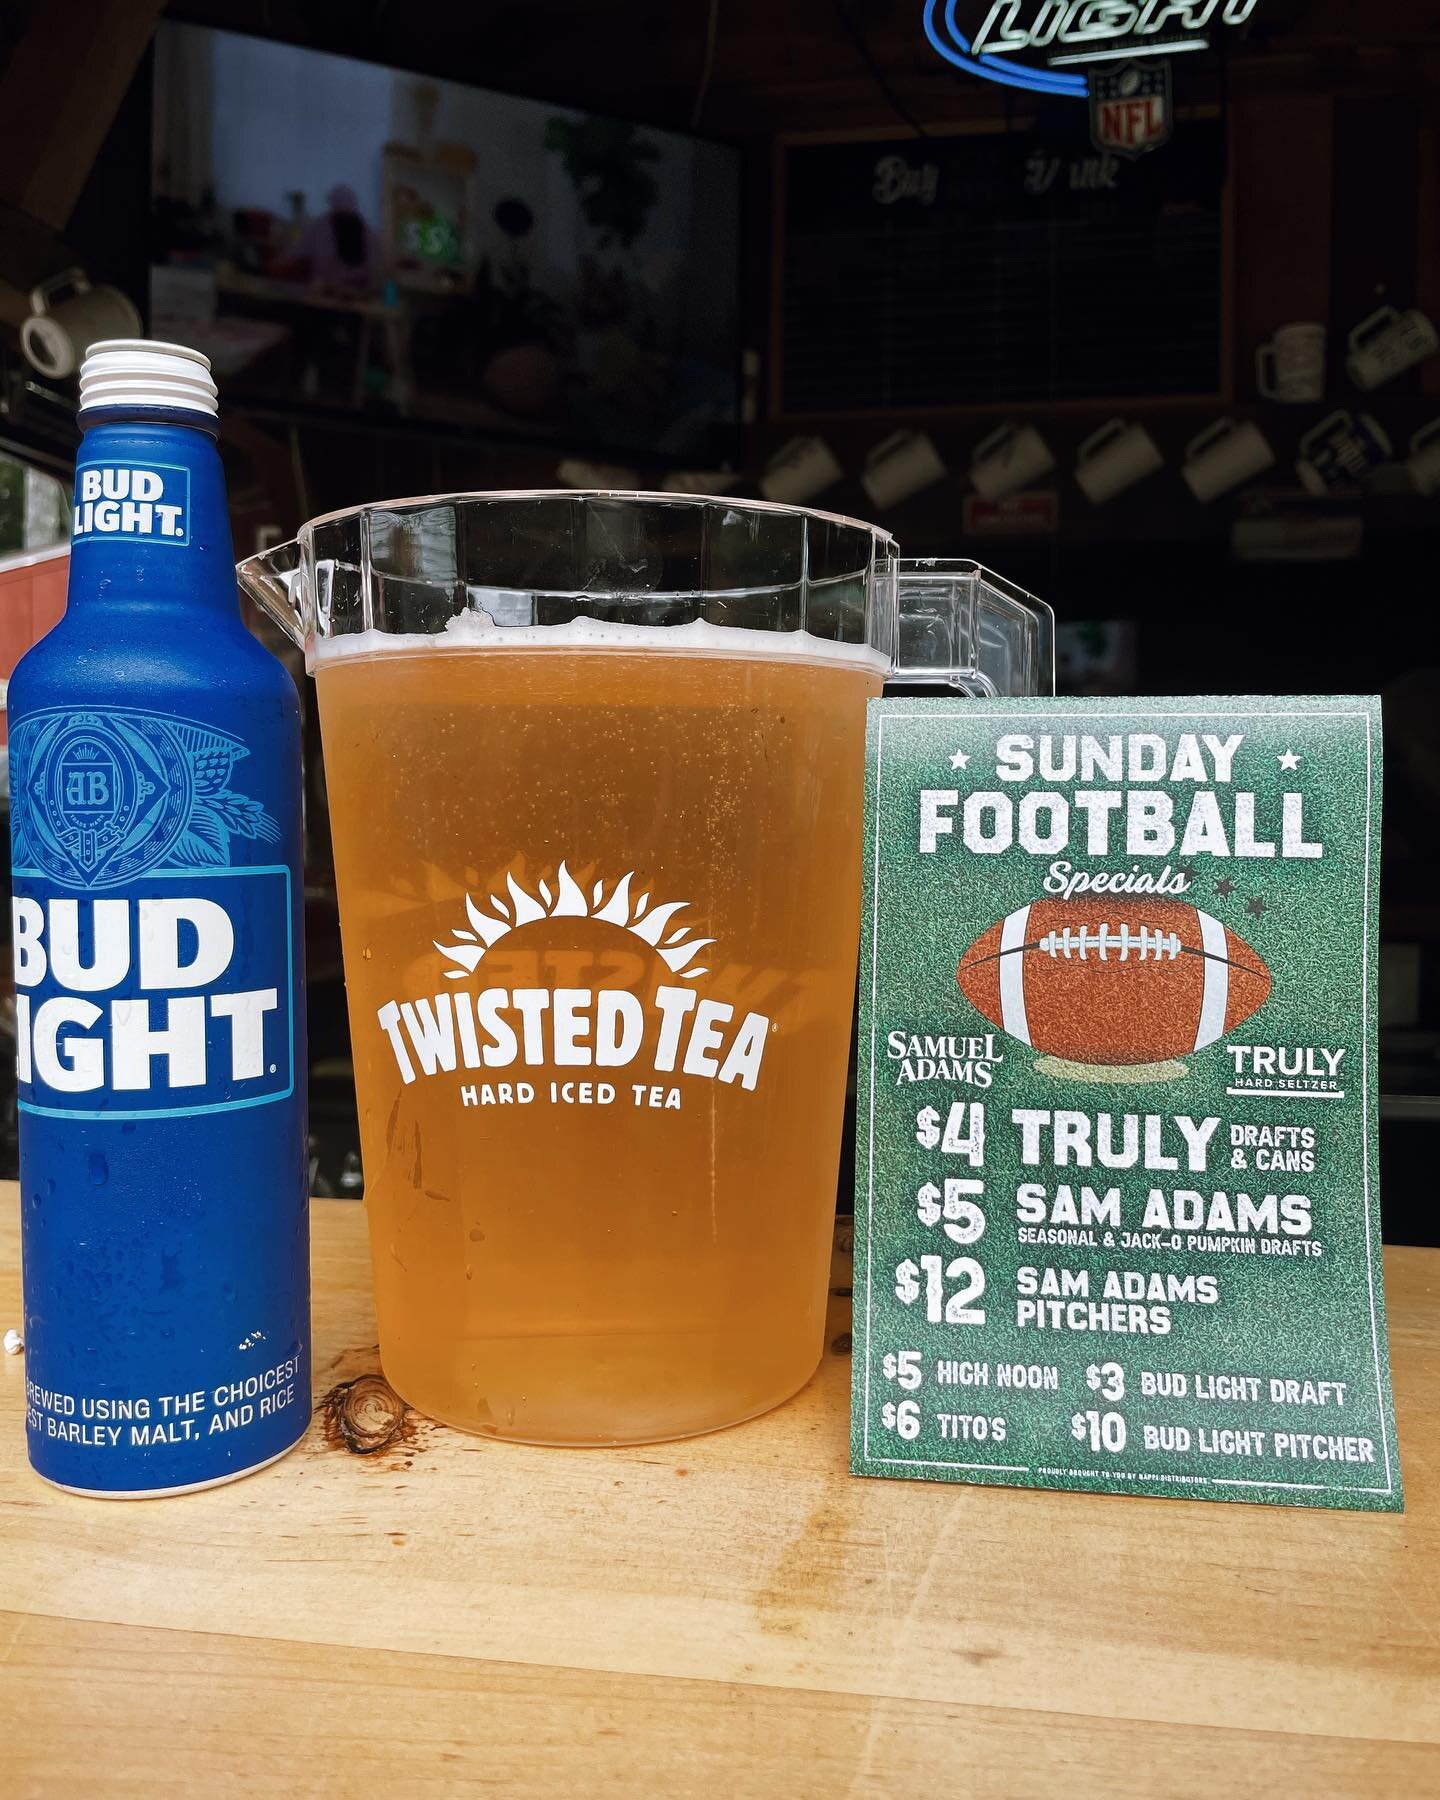 Game day! We upped our TV count and we&rsquo;re ready for kick off. Food &amp; drink specials during the game as well!
.
.
.
.
#PDR #perioddesign #contractor #design #renovation #interiordesign #remodeling #contractorsofinsta #coastalhomes #keepcraft